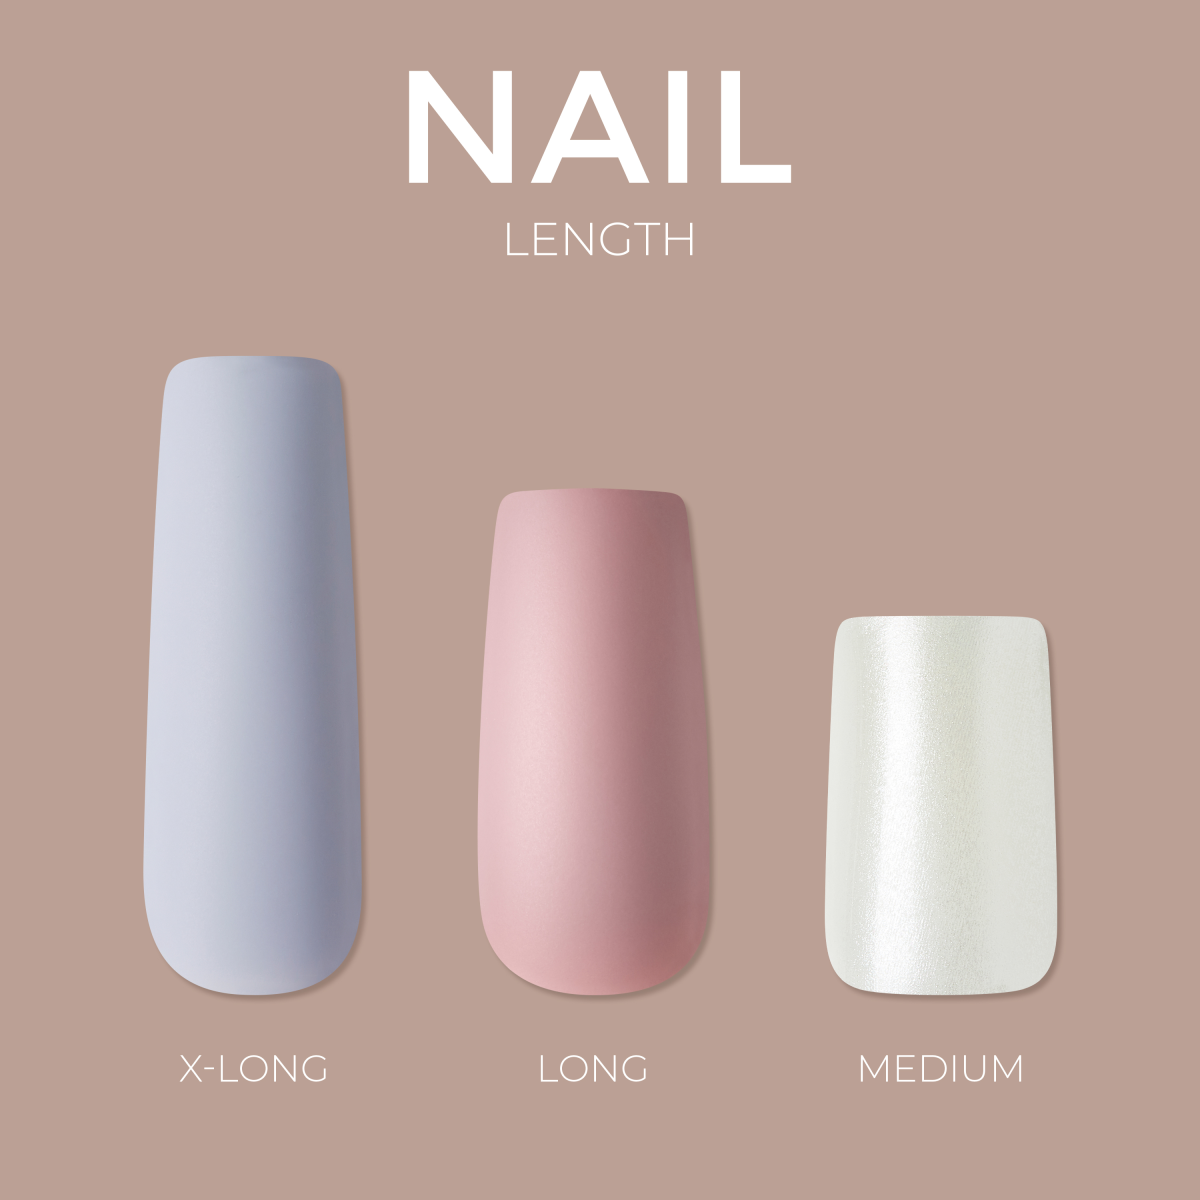 Minimalist Manicure: 30 Natural Nail Designs For Summer